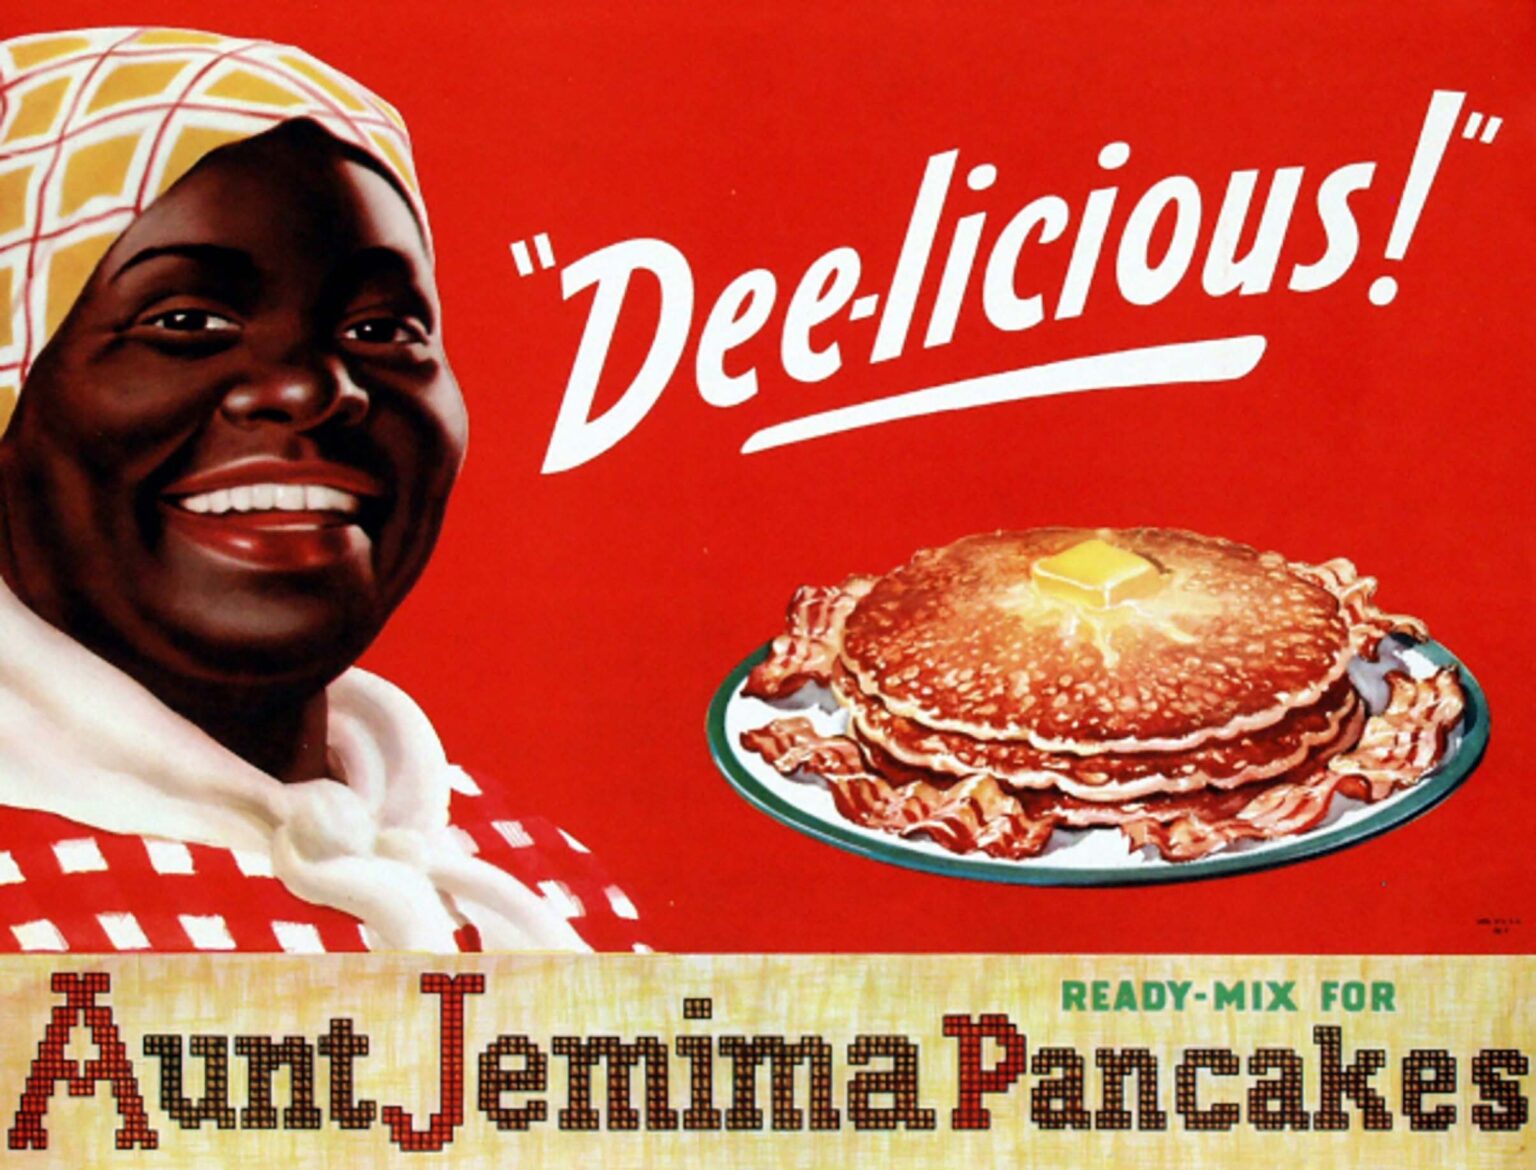 Aunt Jemima is now a thing of the past. Twitter welcomes newly renamed Pearl Milling Company with an homage of hilarious memes.